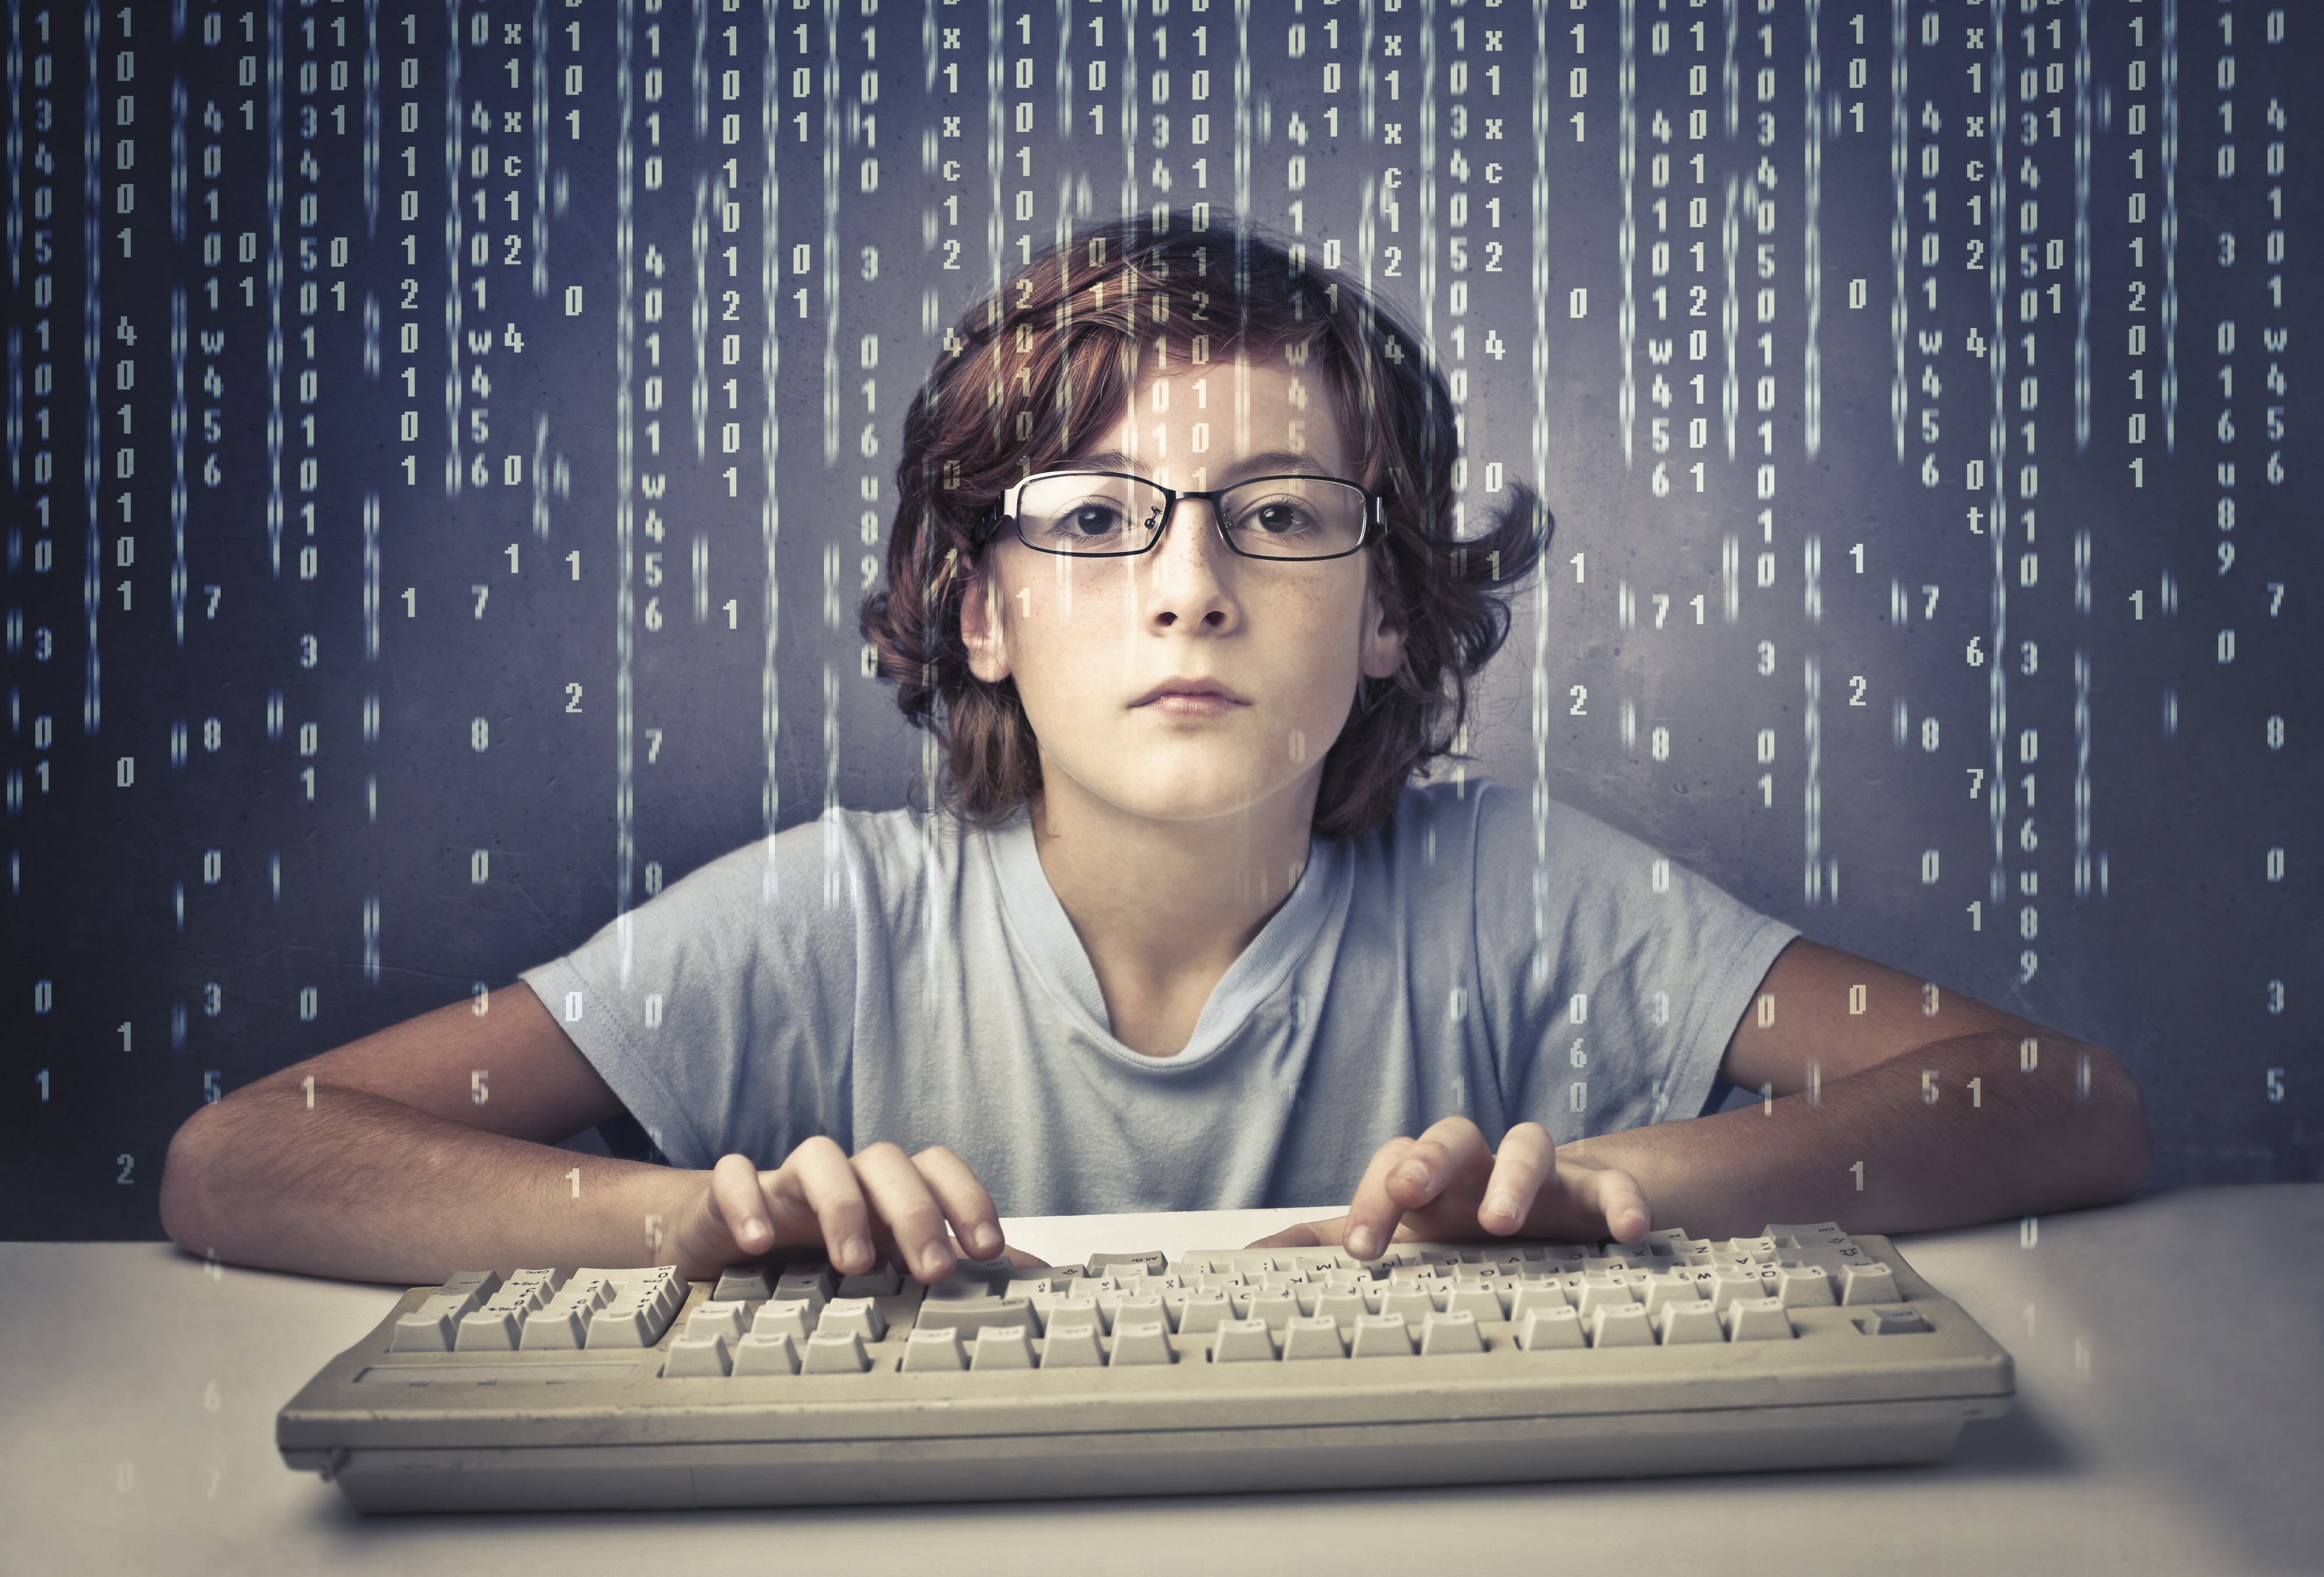 A Hong Kong parent feels her son is not spending enough time working on computers in his primary school. Photo: Shutterstock